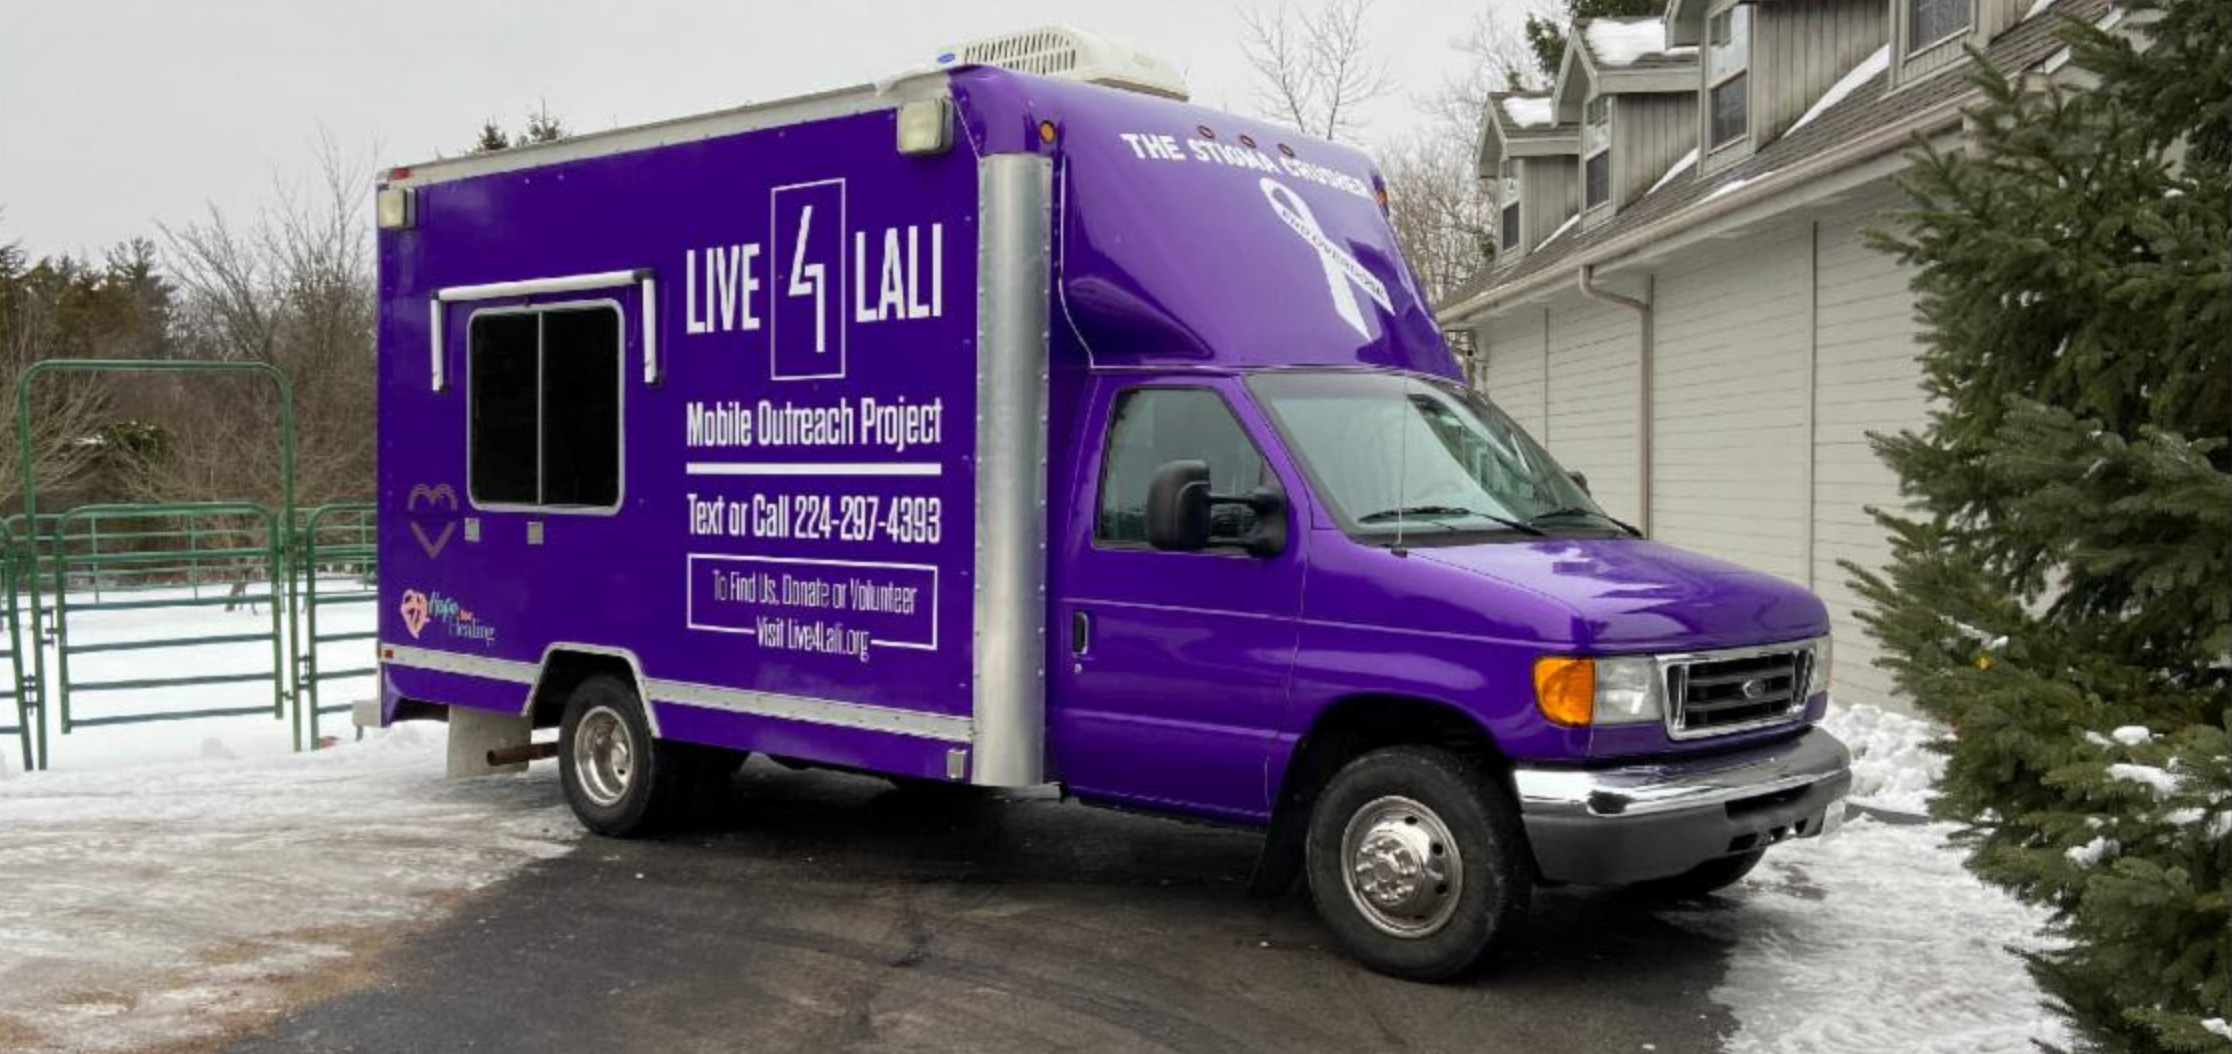 Live 4 Lali, Mobile Outreach Truck